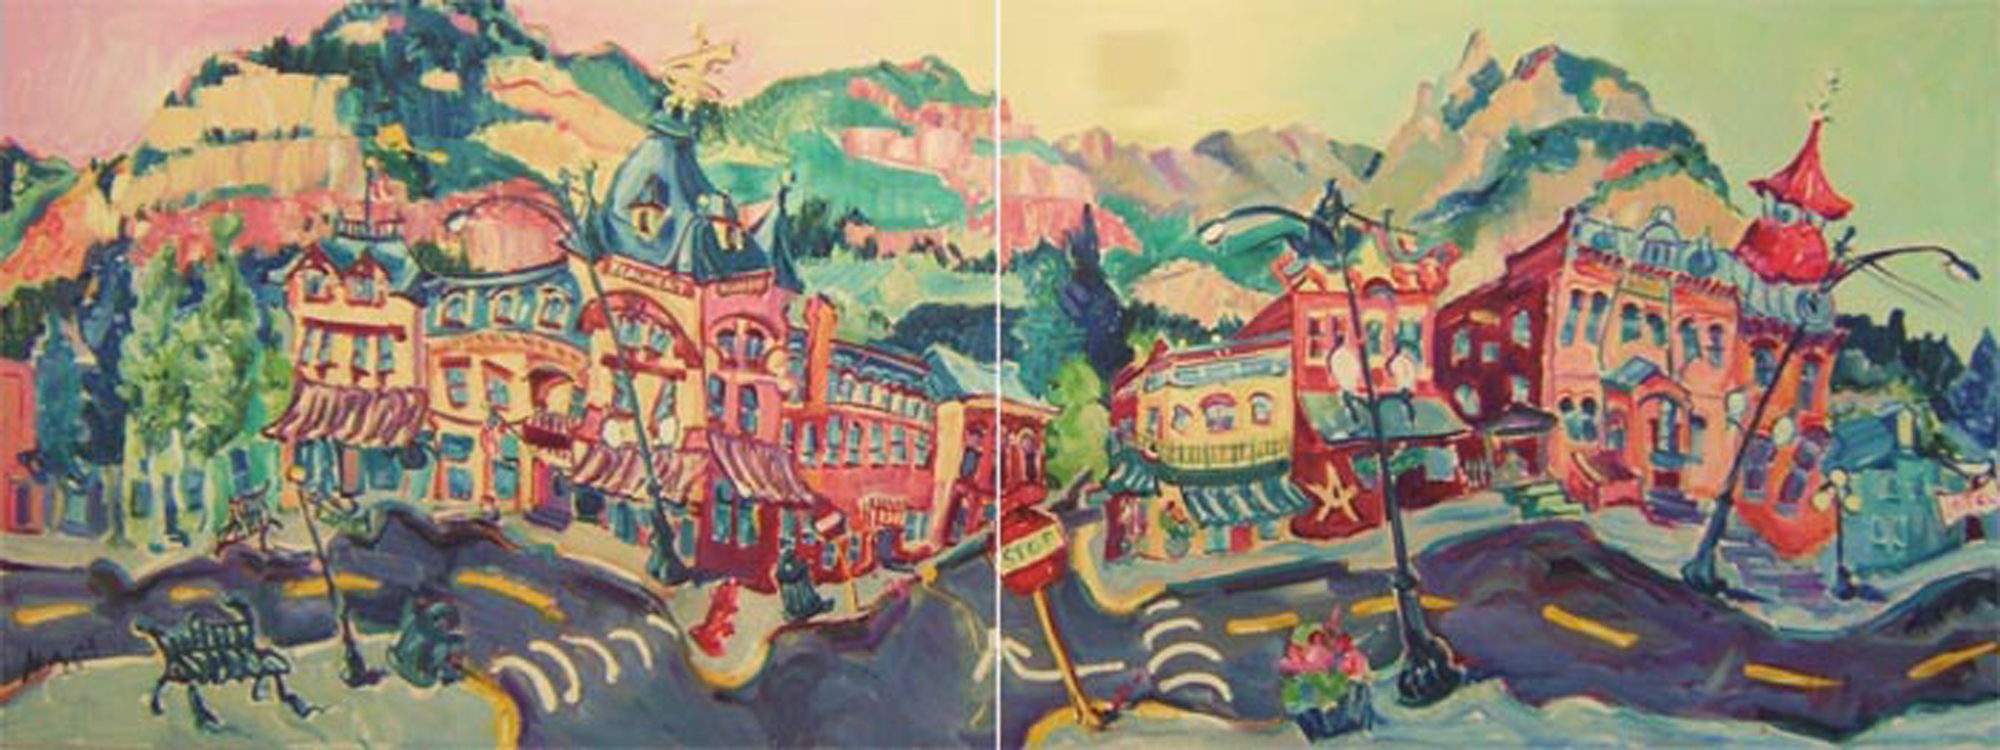 SOLD L022 2009 'Beaumont, Elks, Masons, Downtown Ouray' Diptych. 48"x36" 48"x36"